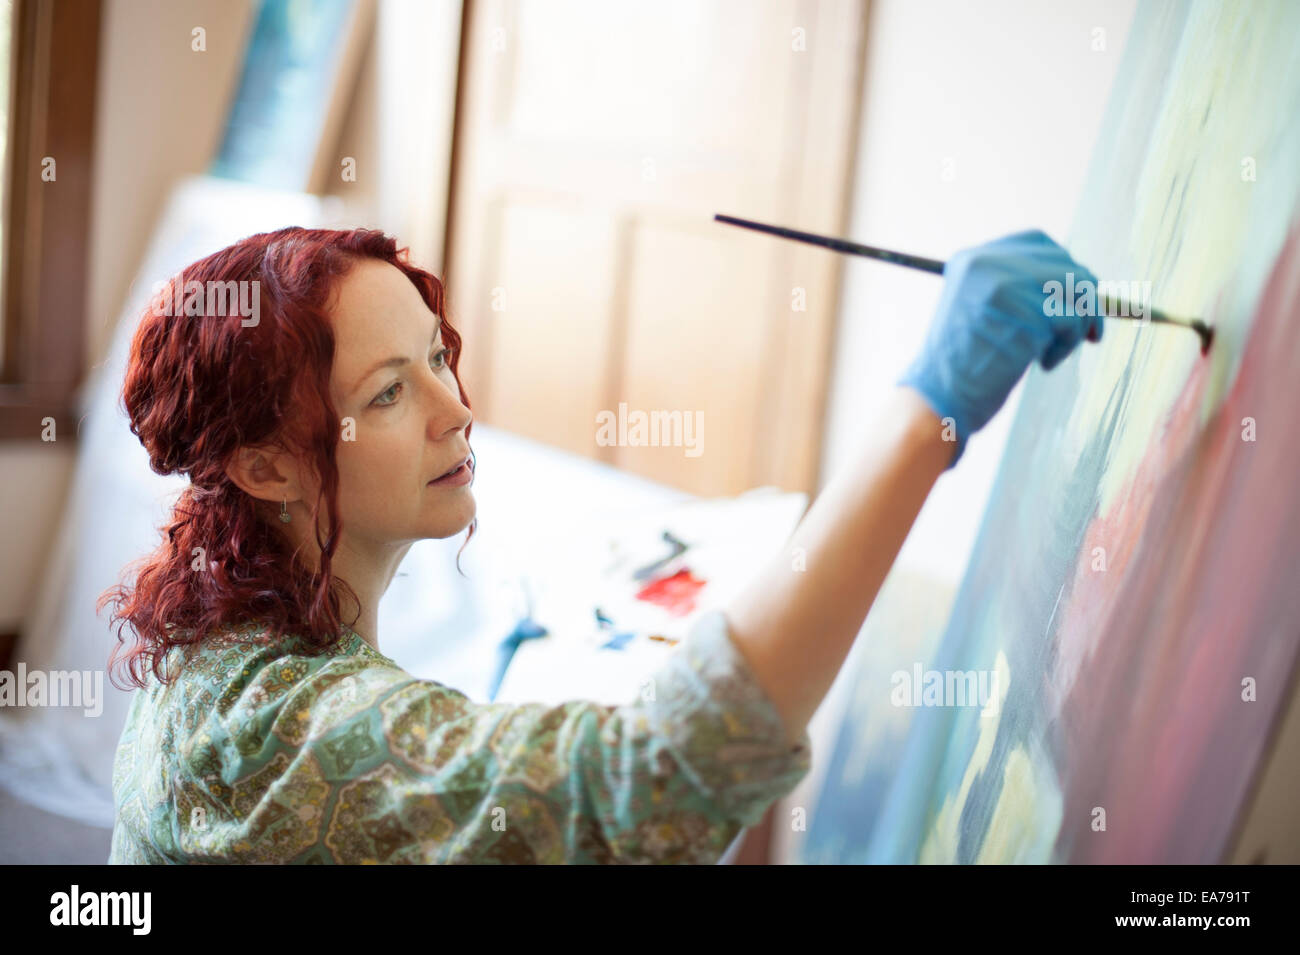 Portrait of middle-aged woman painting on canvas Banque D'Images